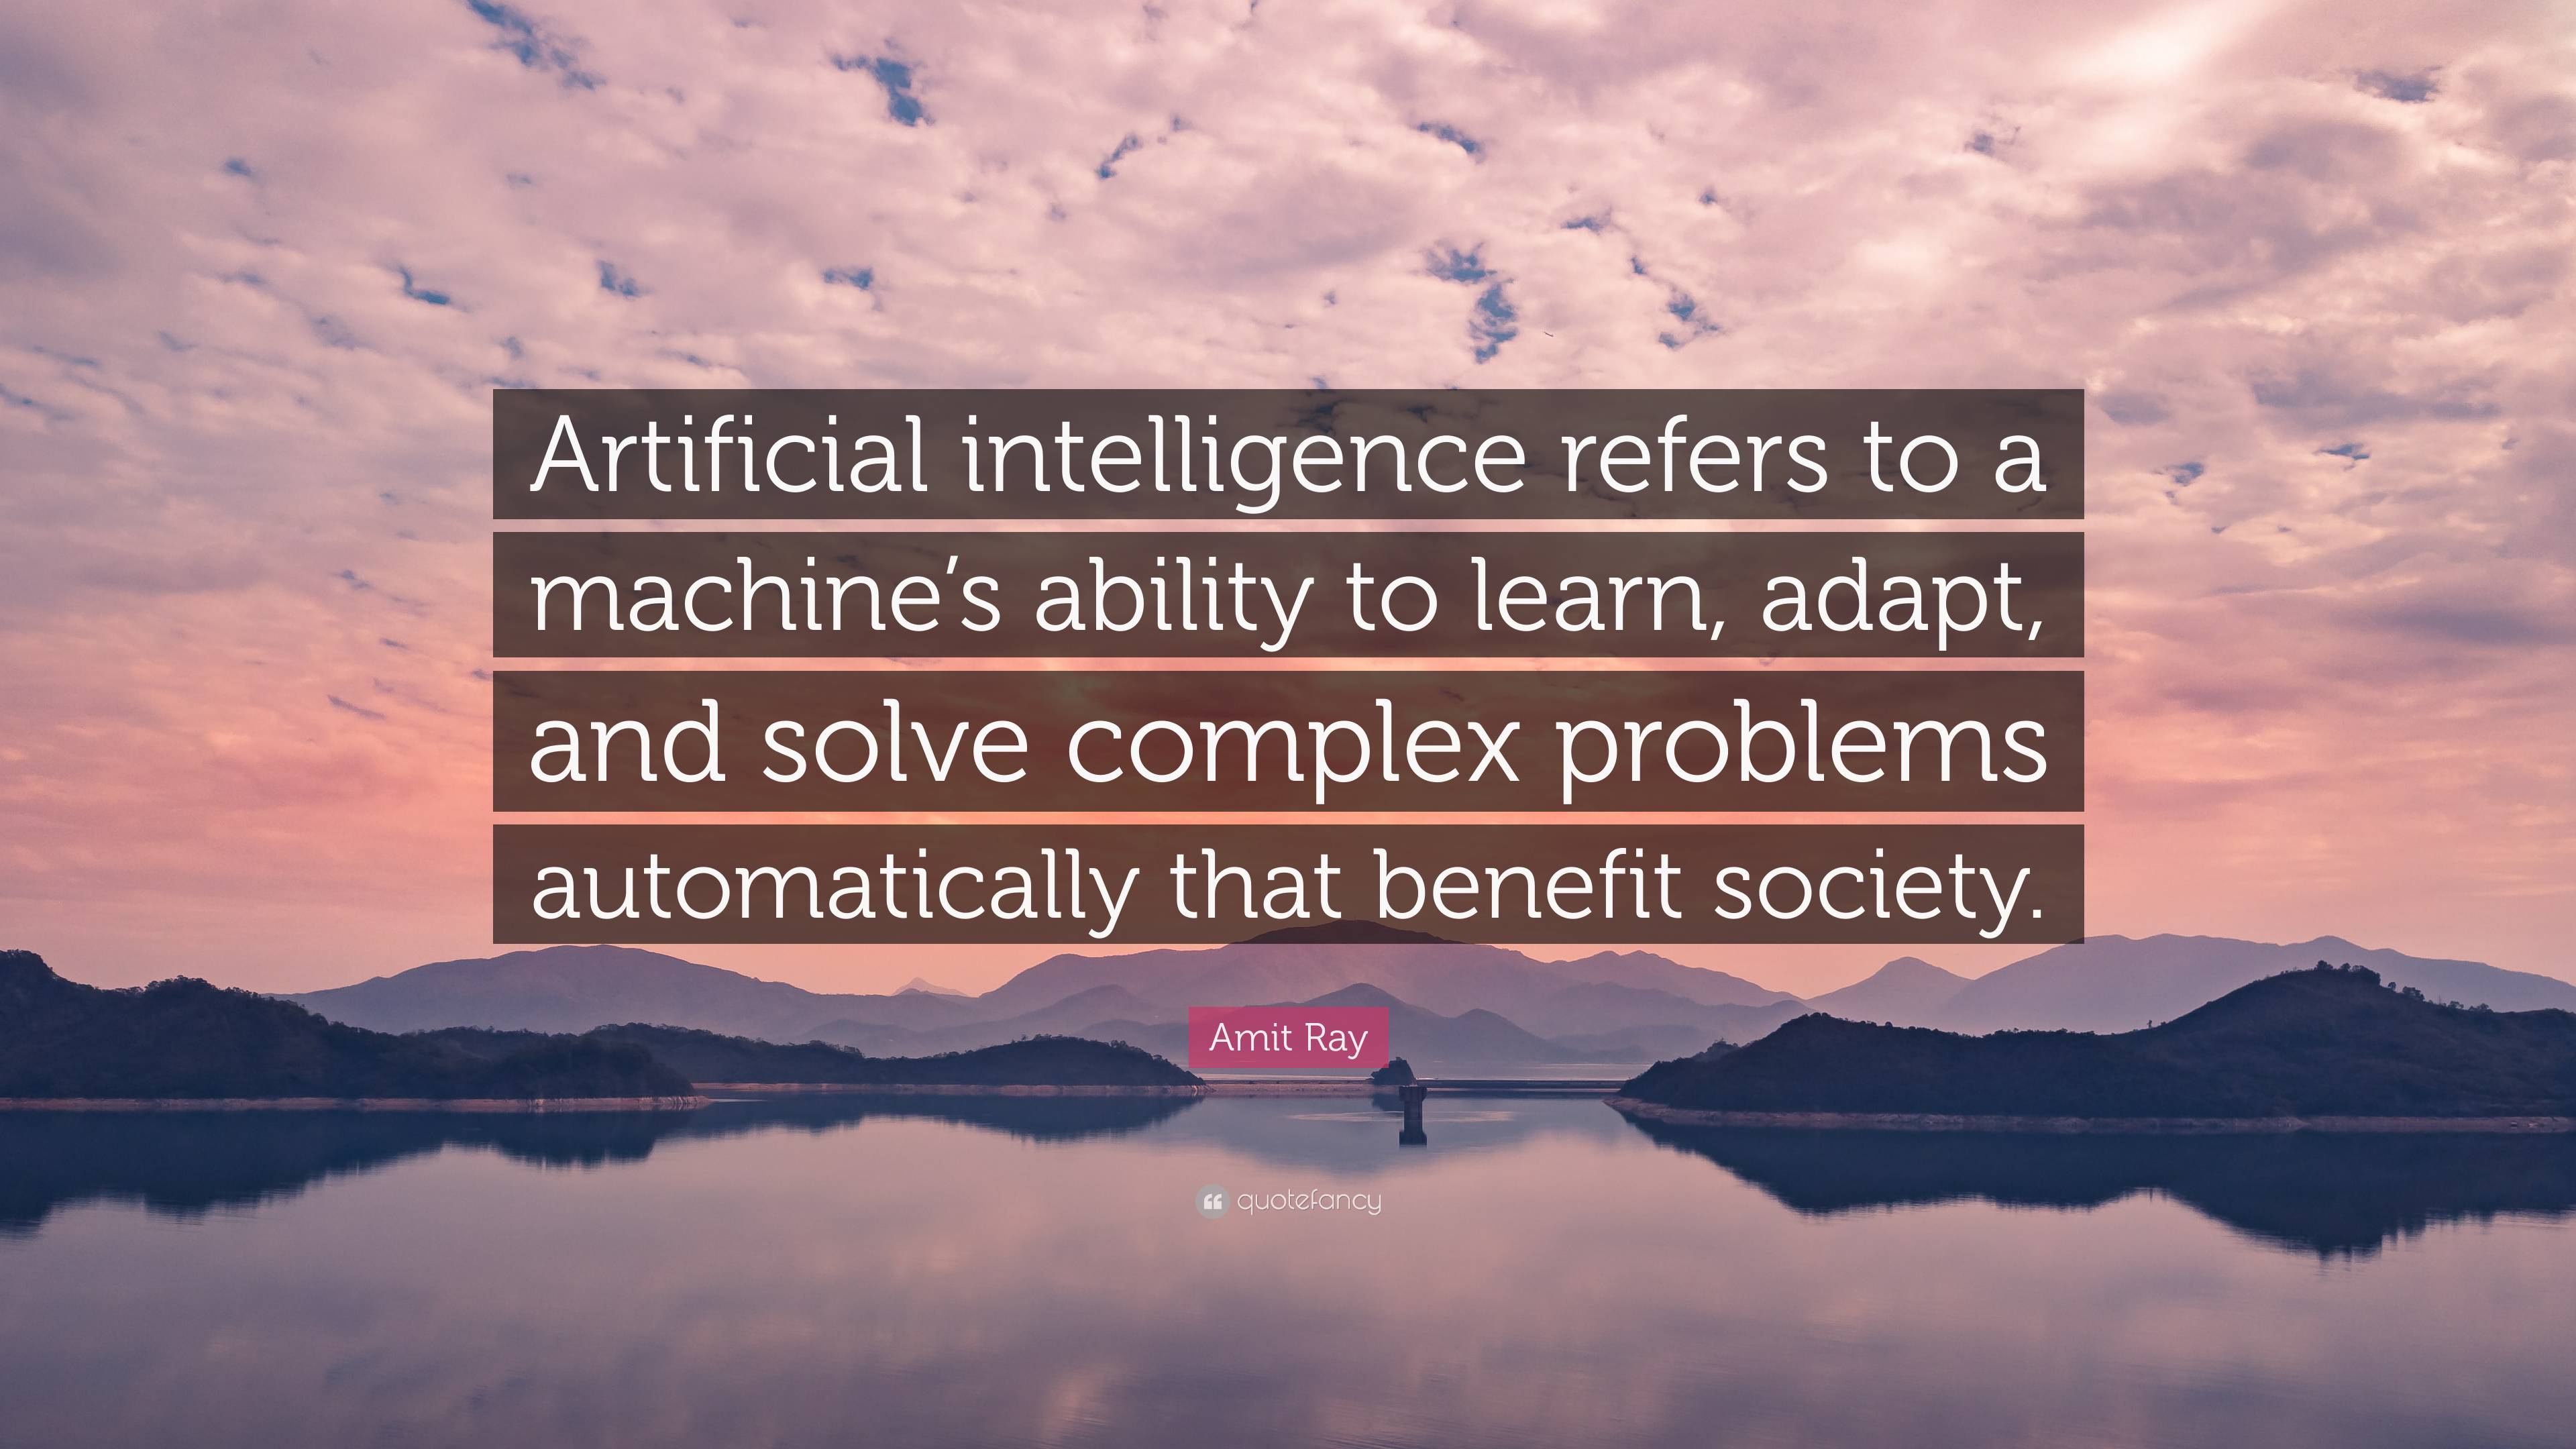 Amit Ray Quote: “Artificial intelligence refers to a machine’s ability ...